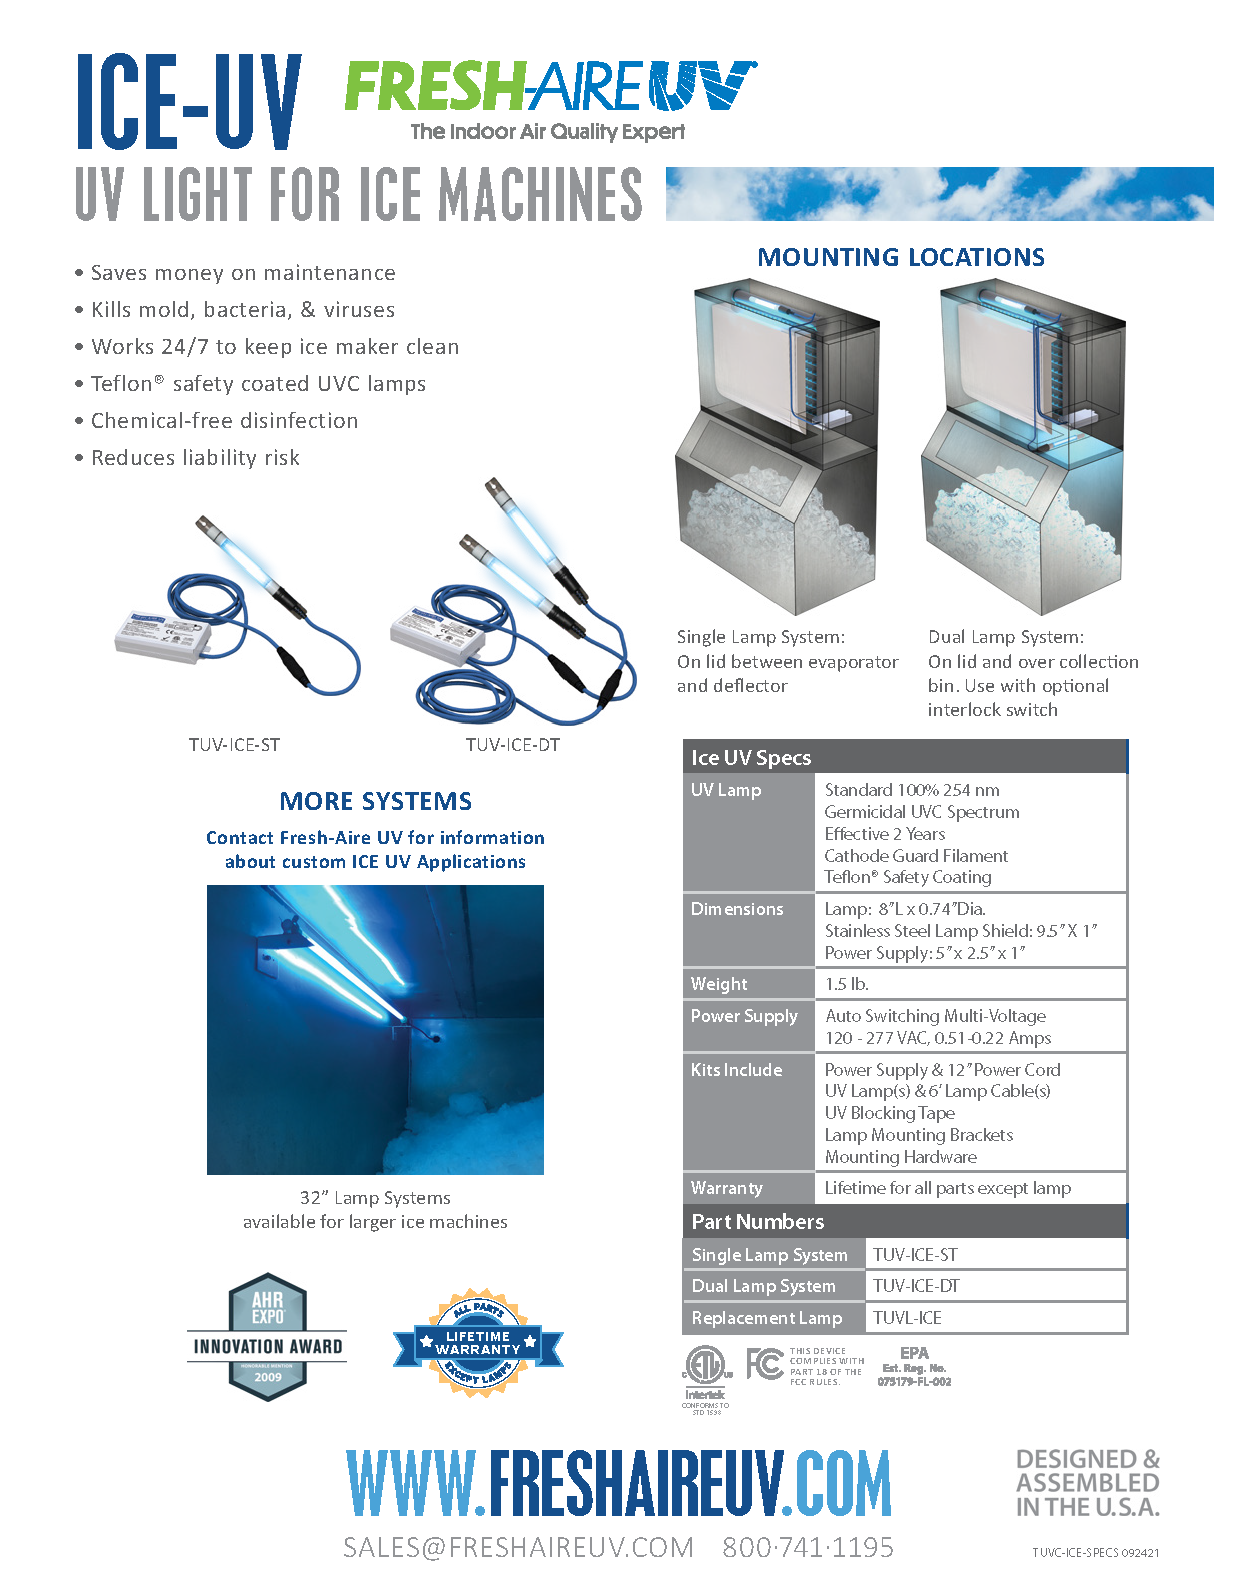 Fresh-Aire TUV-ICE-ST and TUV-ICE-DT Germicidal System for Ice Machines